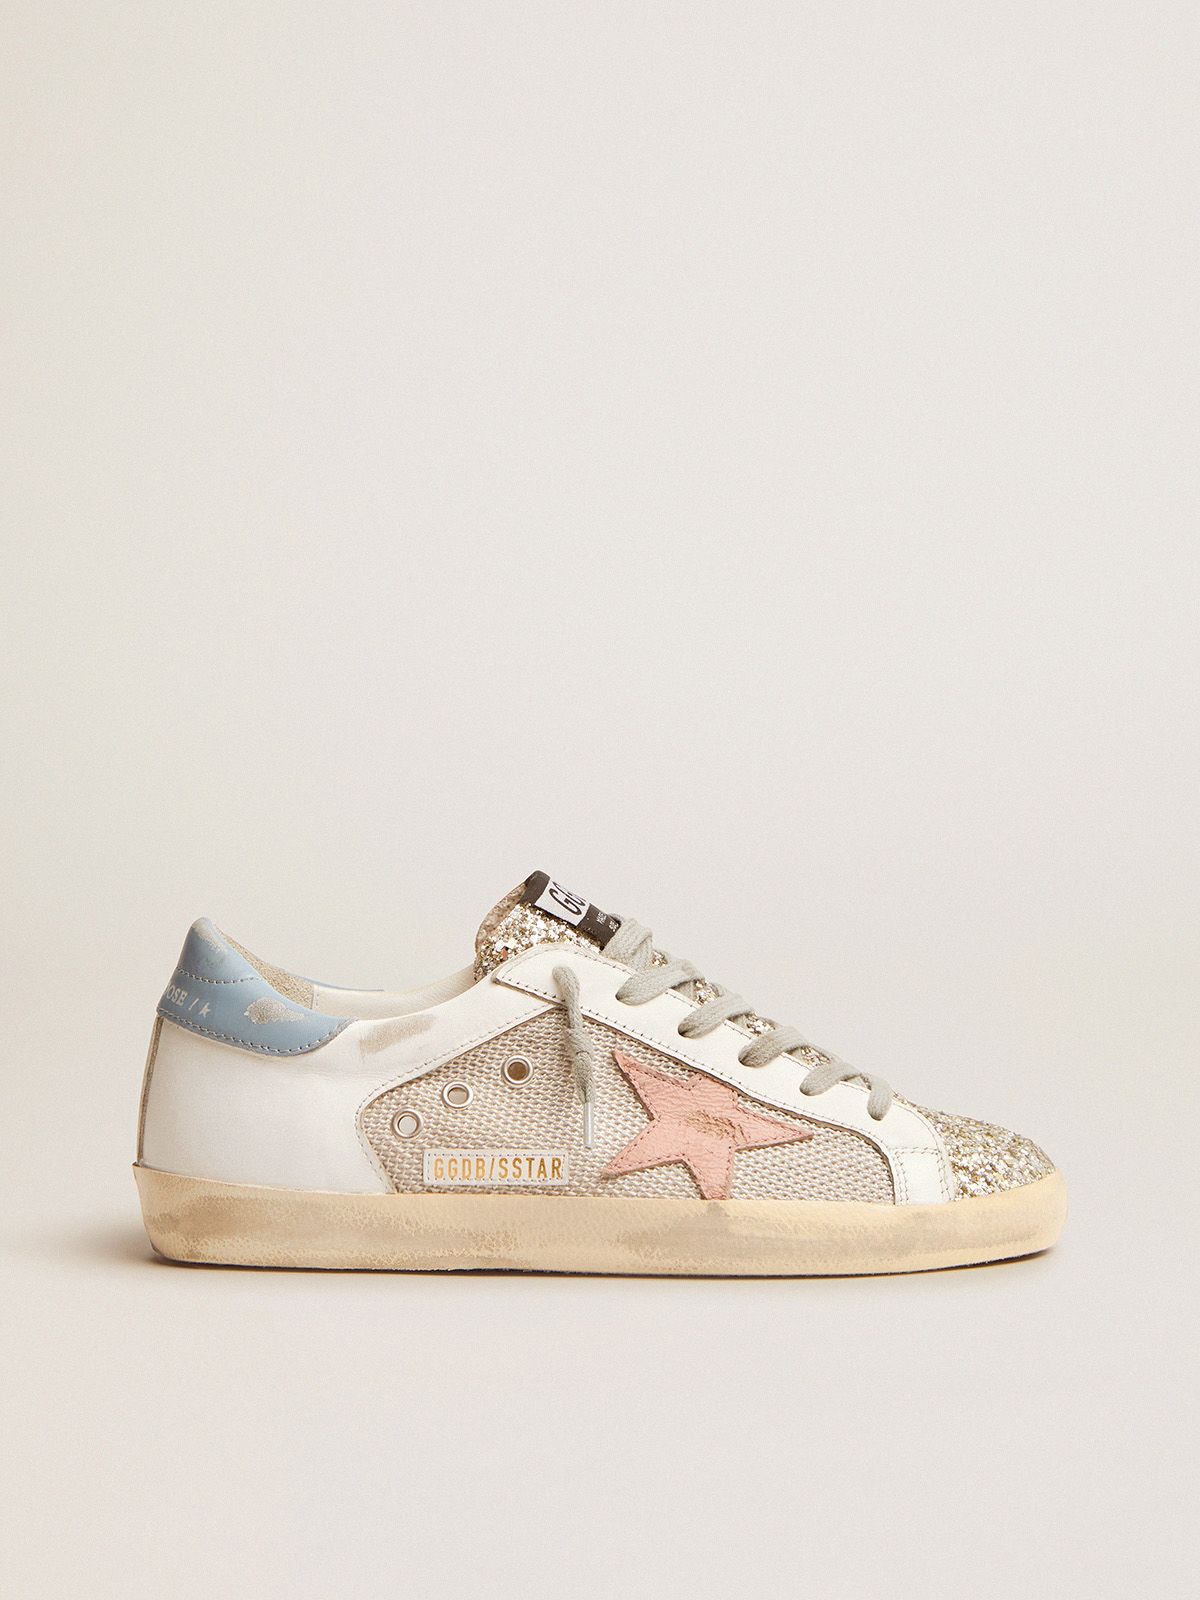 golden goose insert leather Super-Star LTD in white tongue mesh with and sneakers glitter silver